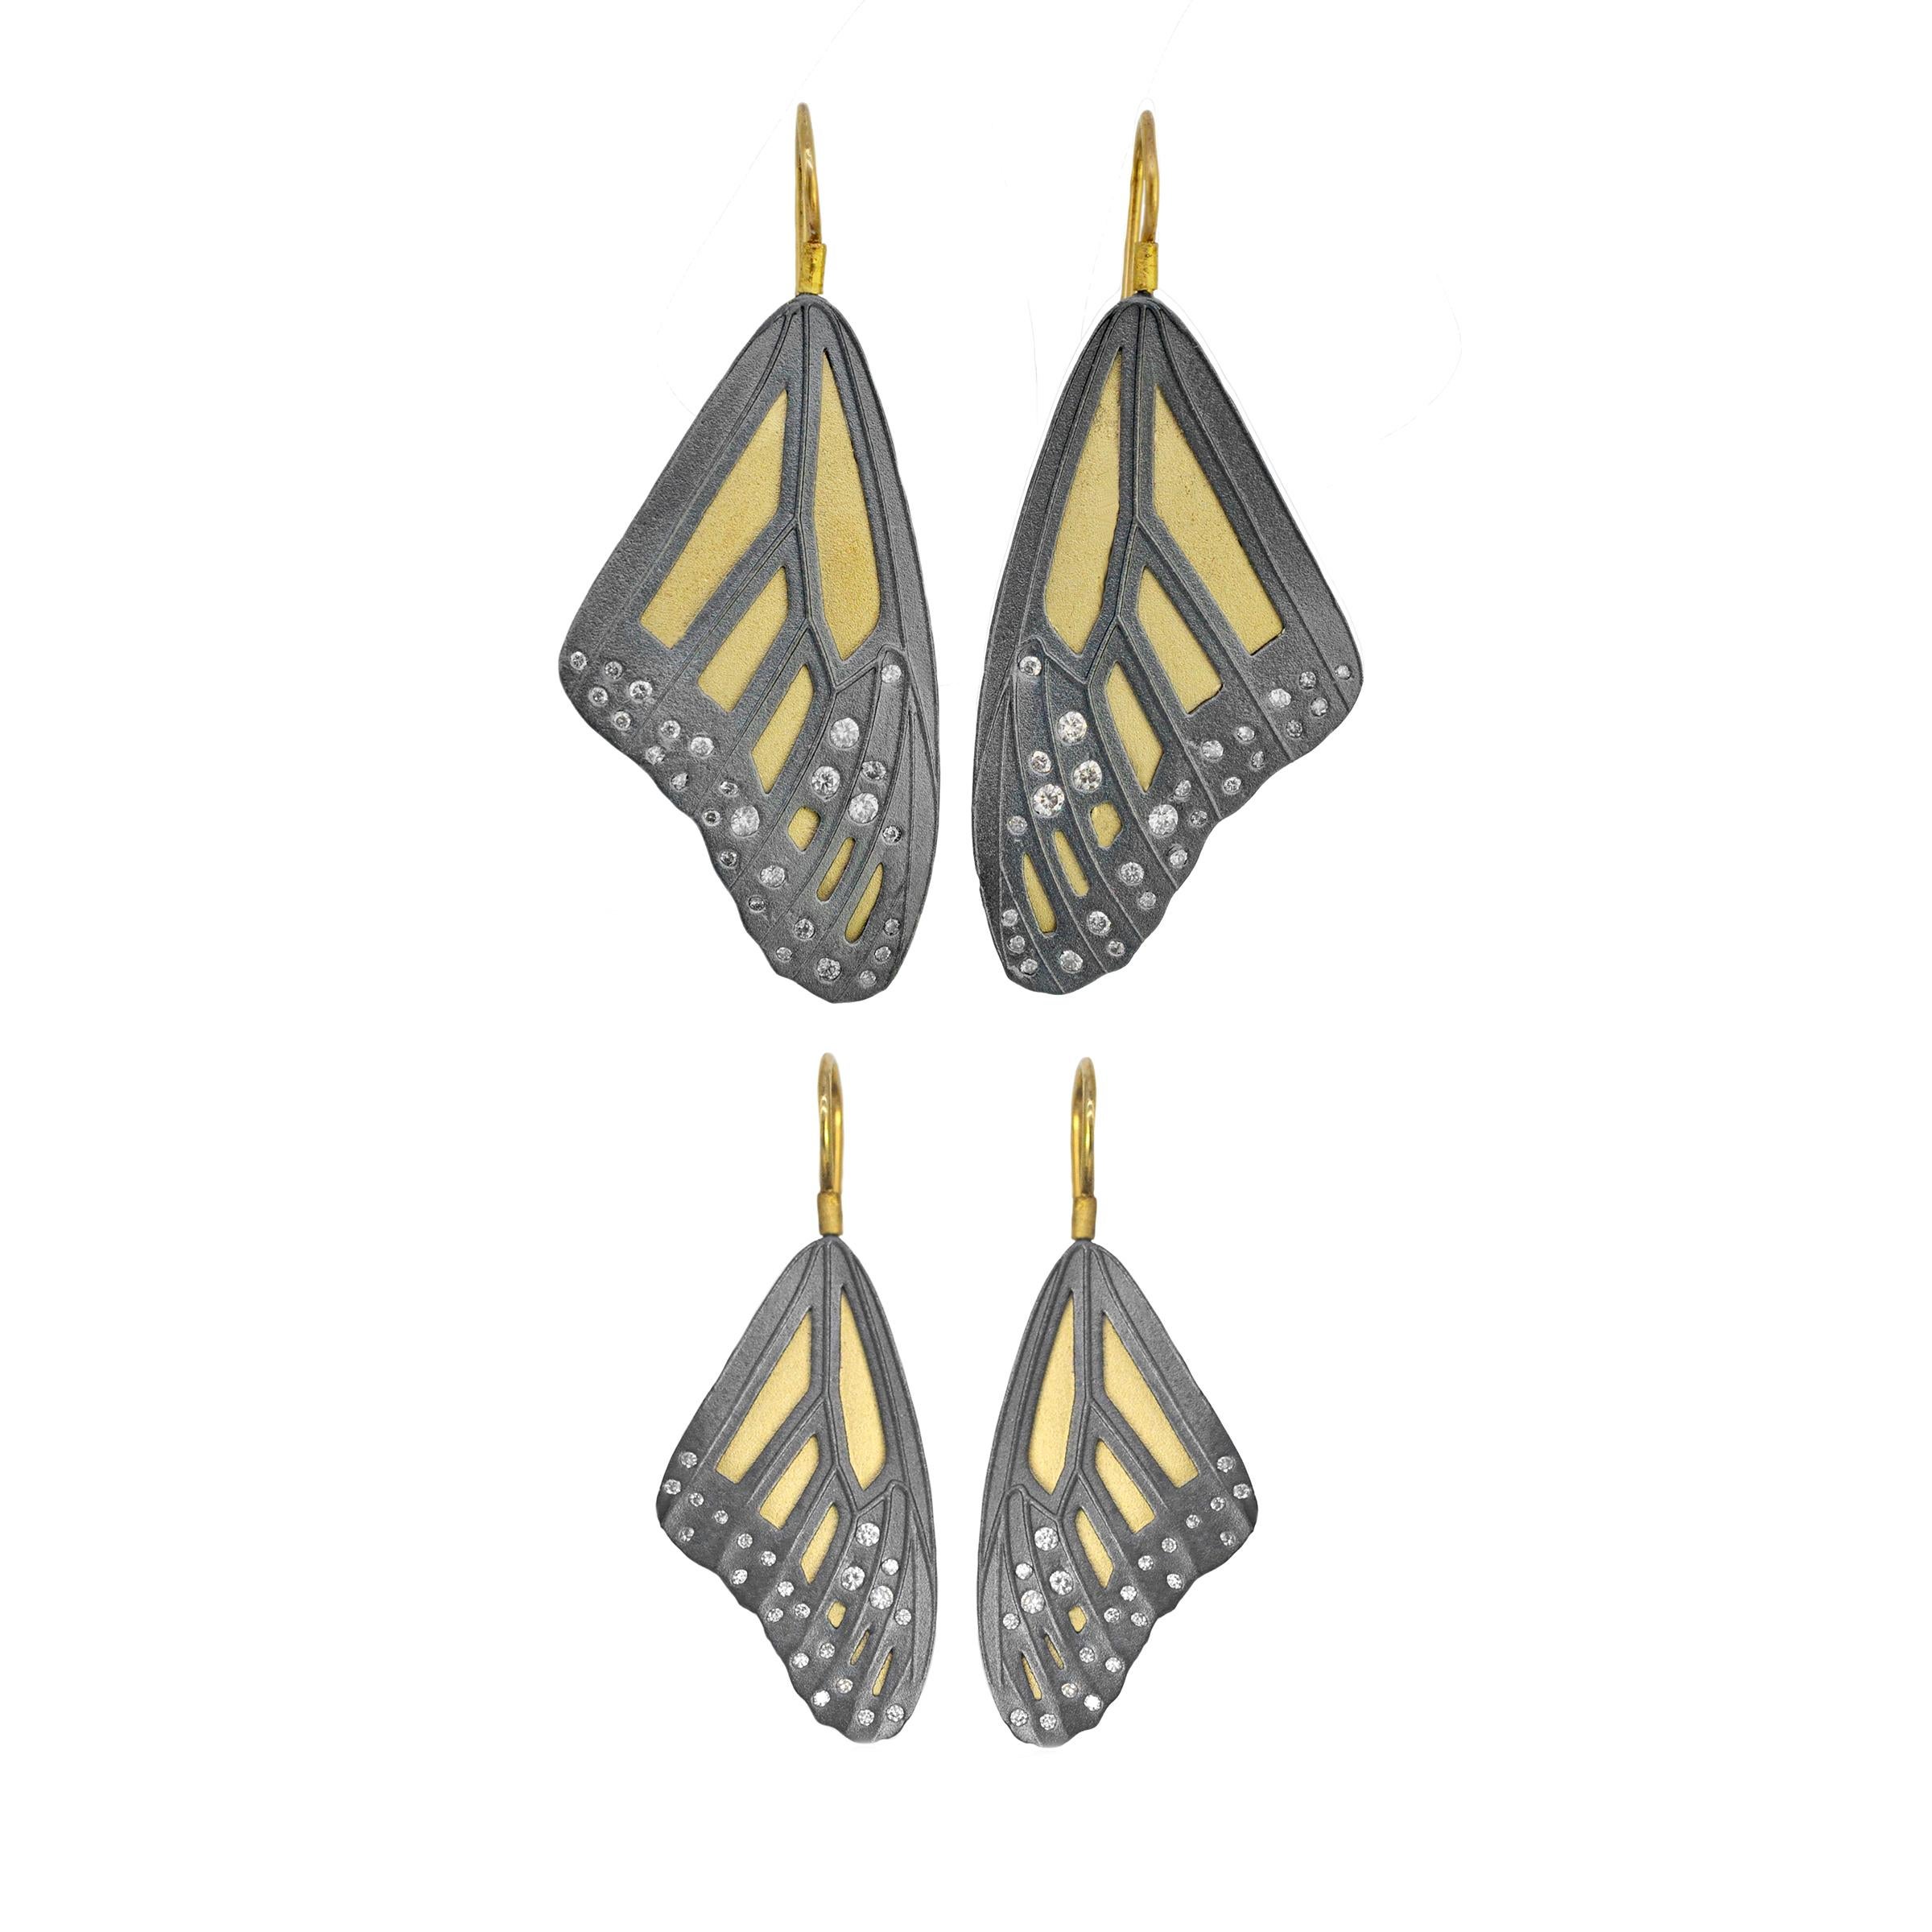 A true Rebecca Myers Design signature piece, our monarch butterfly wing designs are modeled after nature's masterpiece and hand crafted with the highest quality materials. Oxidized sterling silver is layered over 18k yellow gold, with sparkling